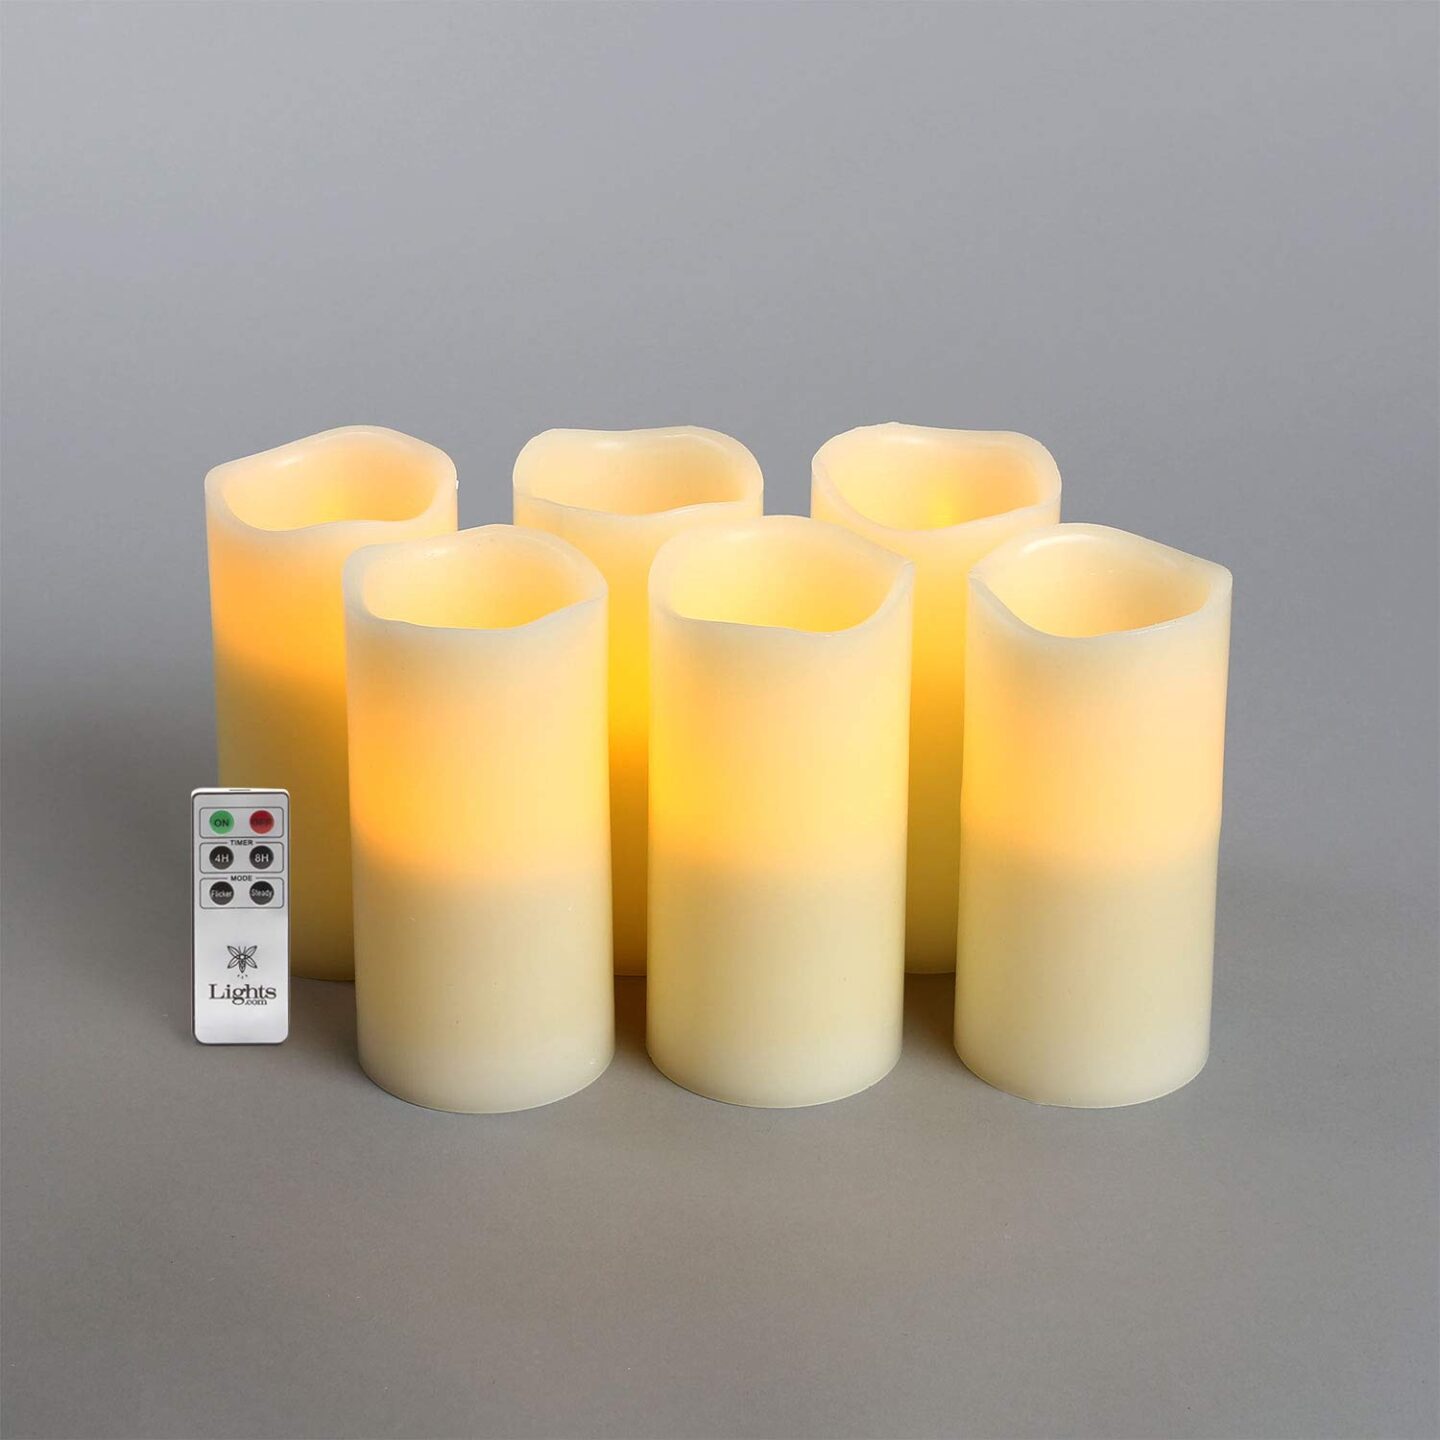 Flameless pillar candle set with remote - Come explore Thanksgiving table decor! 